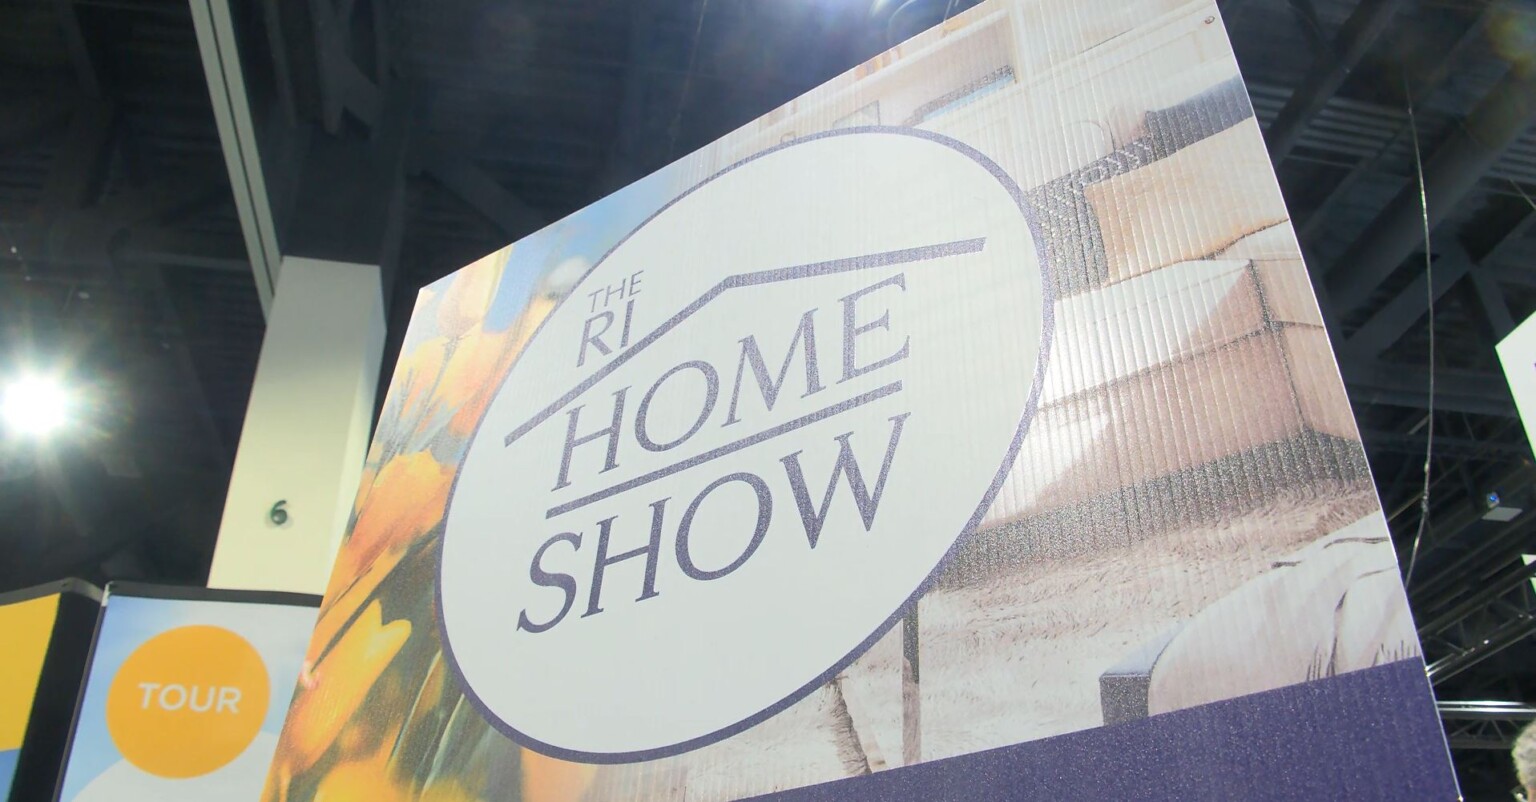 R.I. Home Show returns to convention center in Providence ABC6